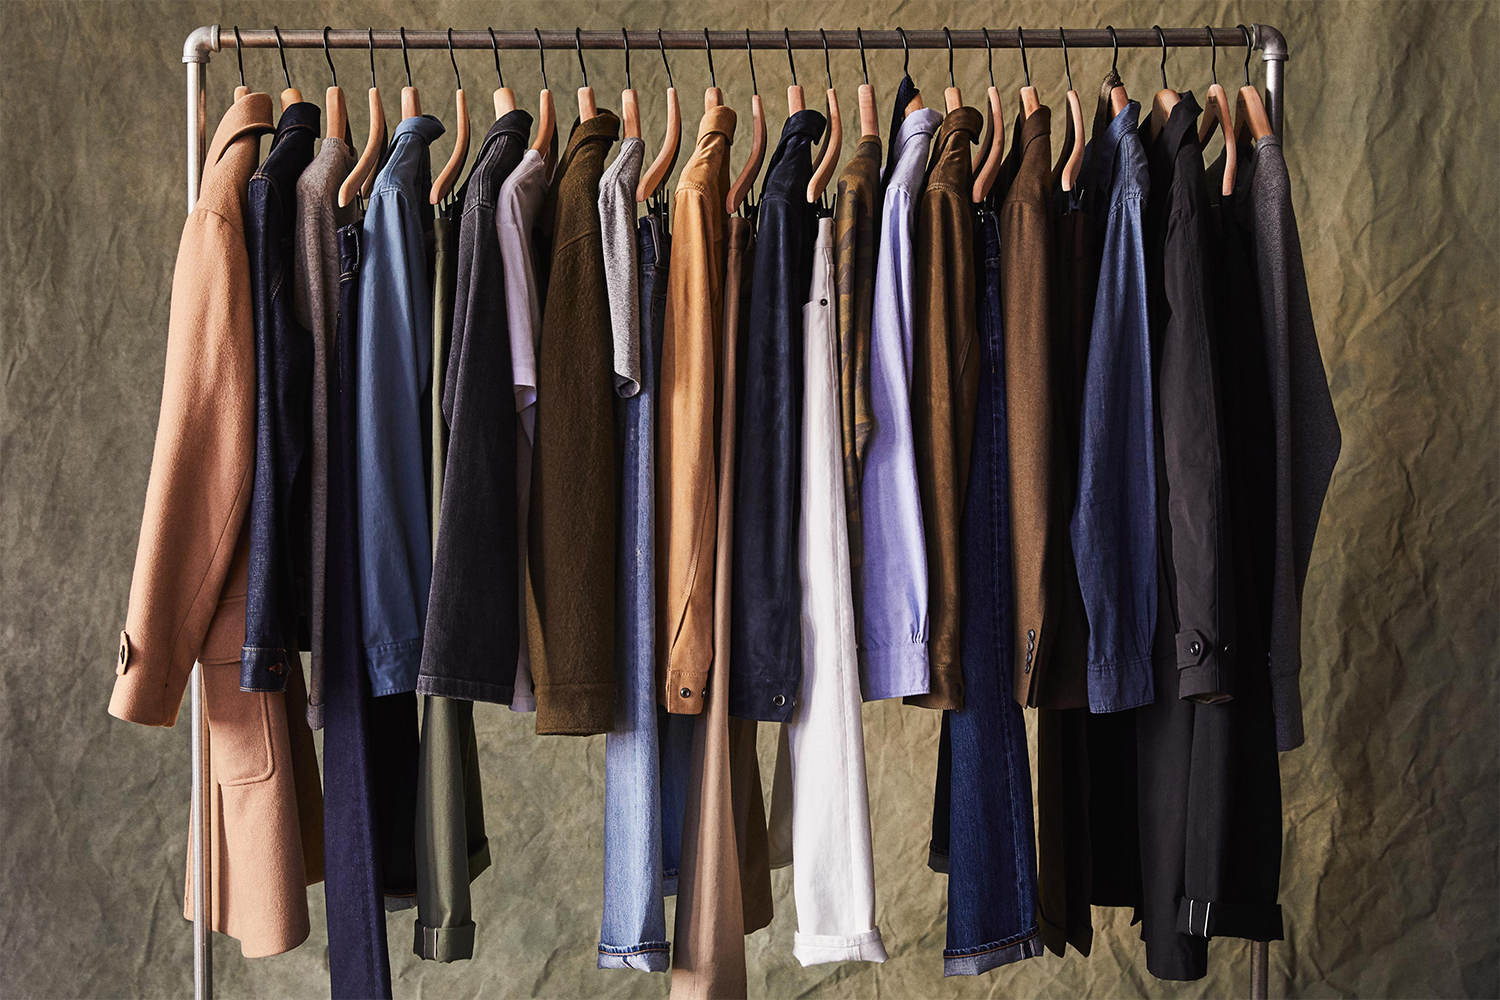 A rack of men's clothes, from pants to shirts to jackets, from Todd Snyder's TSX capsule collection, a 10-year anniversary clothing line